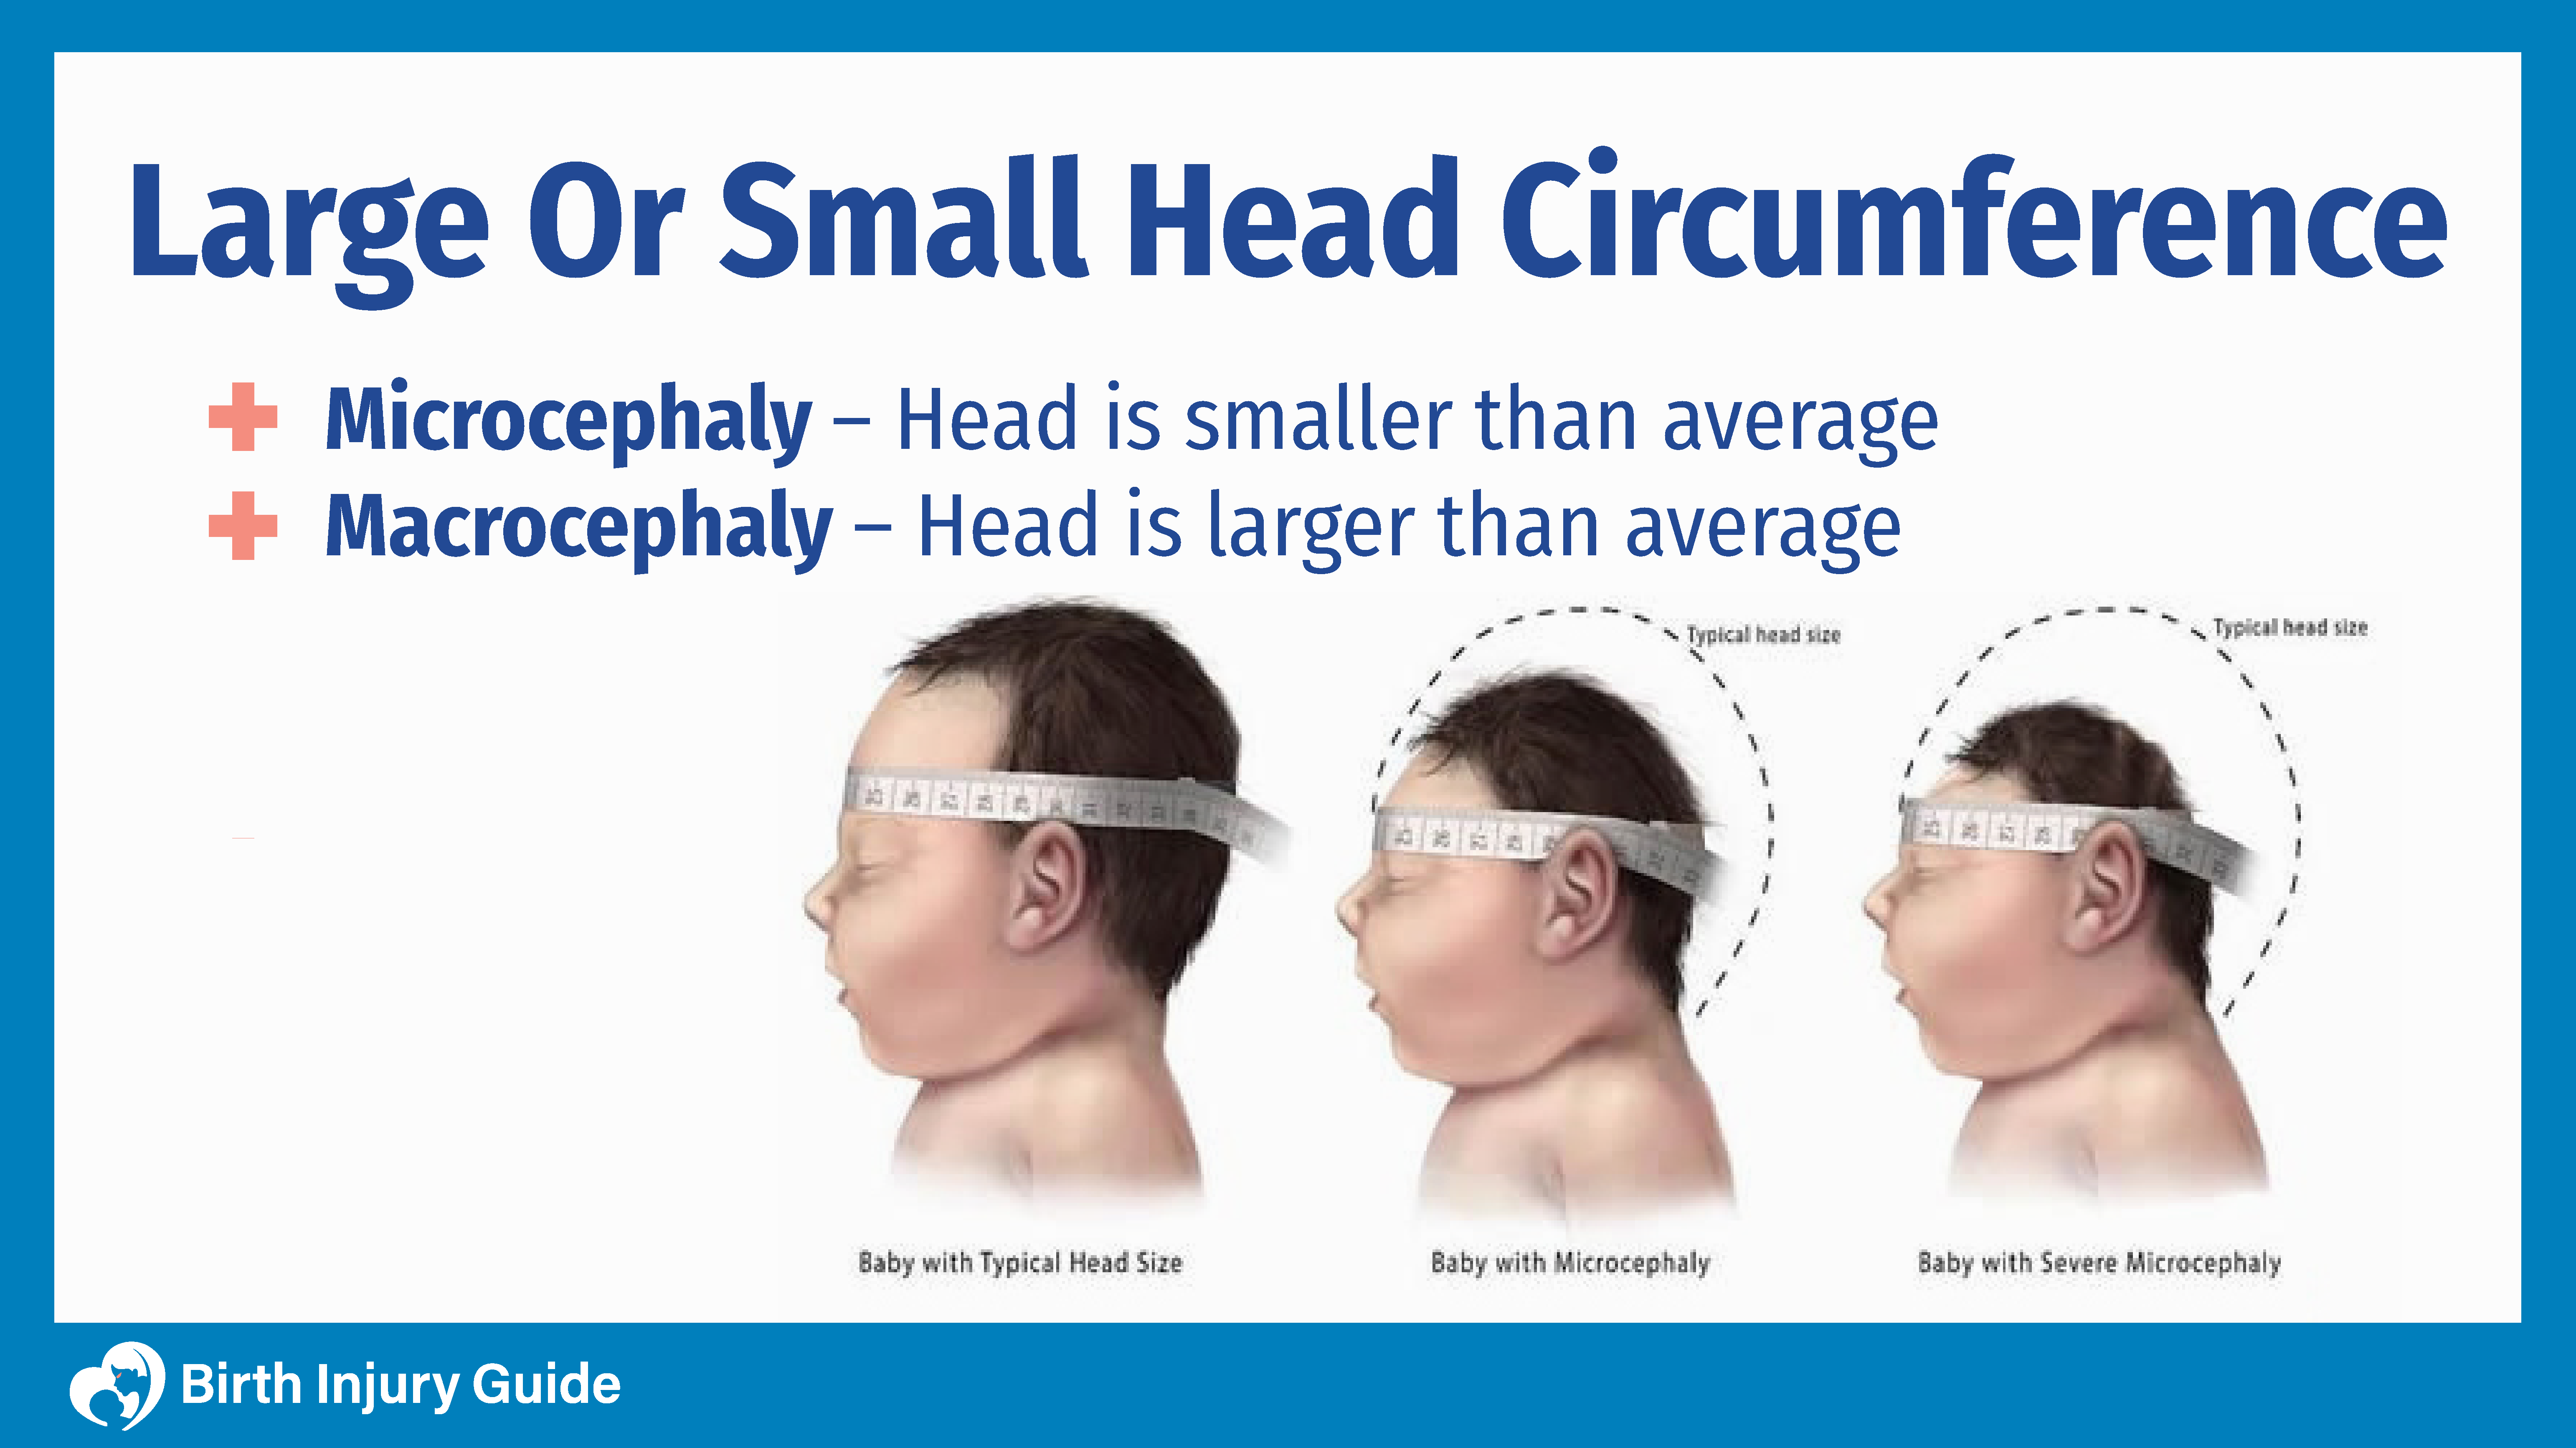 Small Birth Head or Injury Guide Circumference - Large